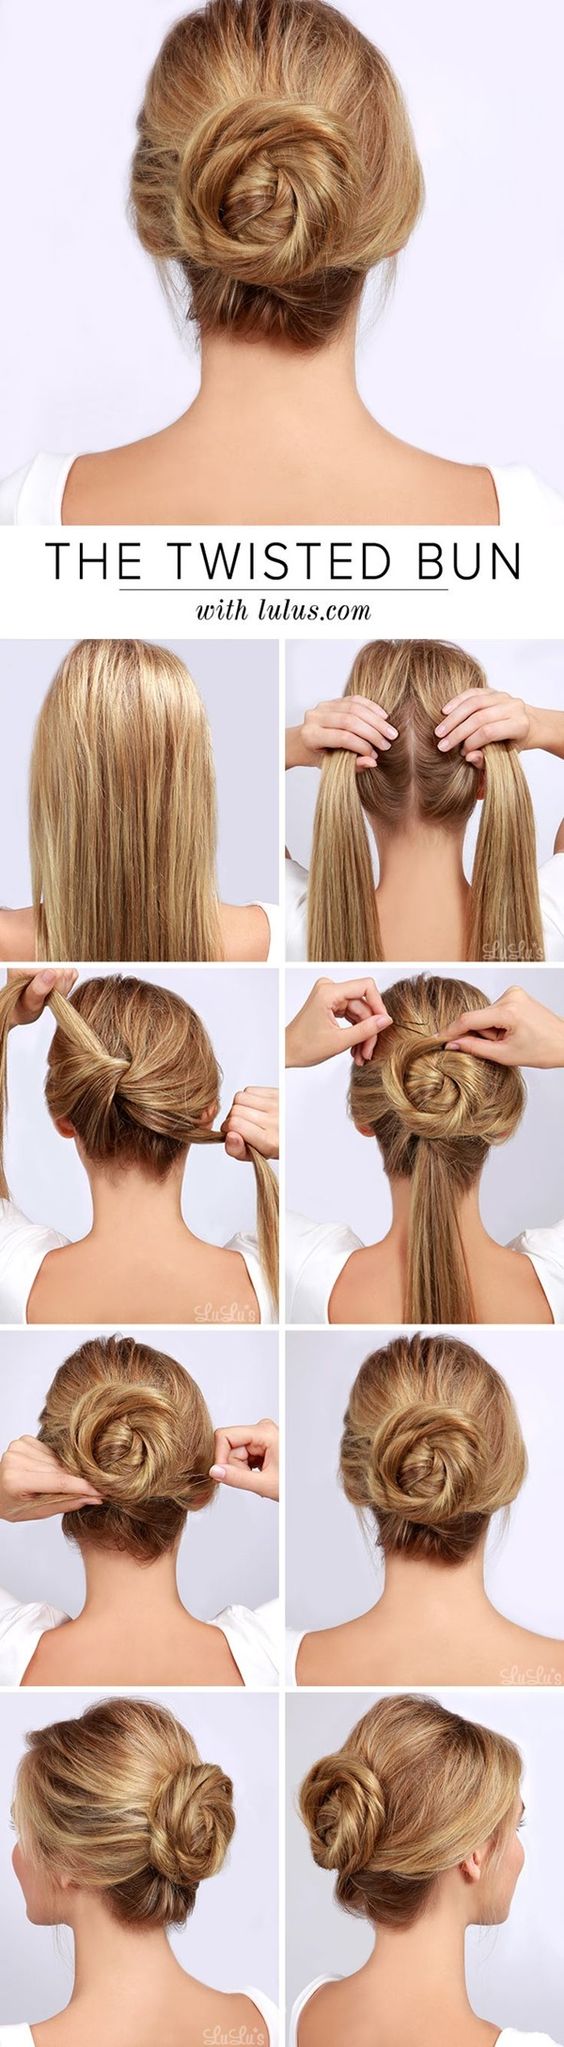 15 Easy Hairstyles For Any and All Lazy Girls